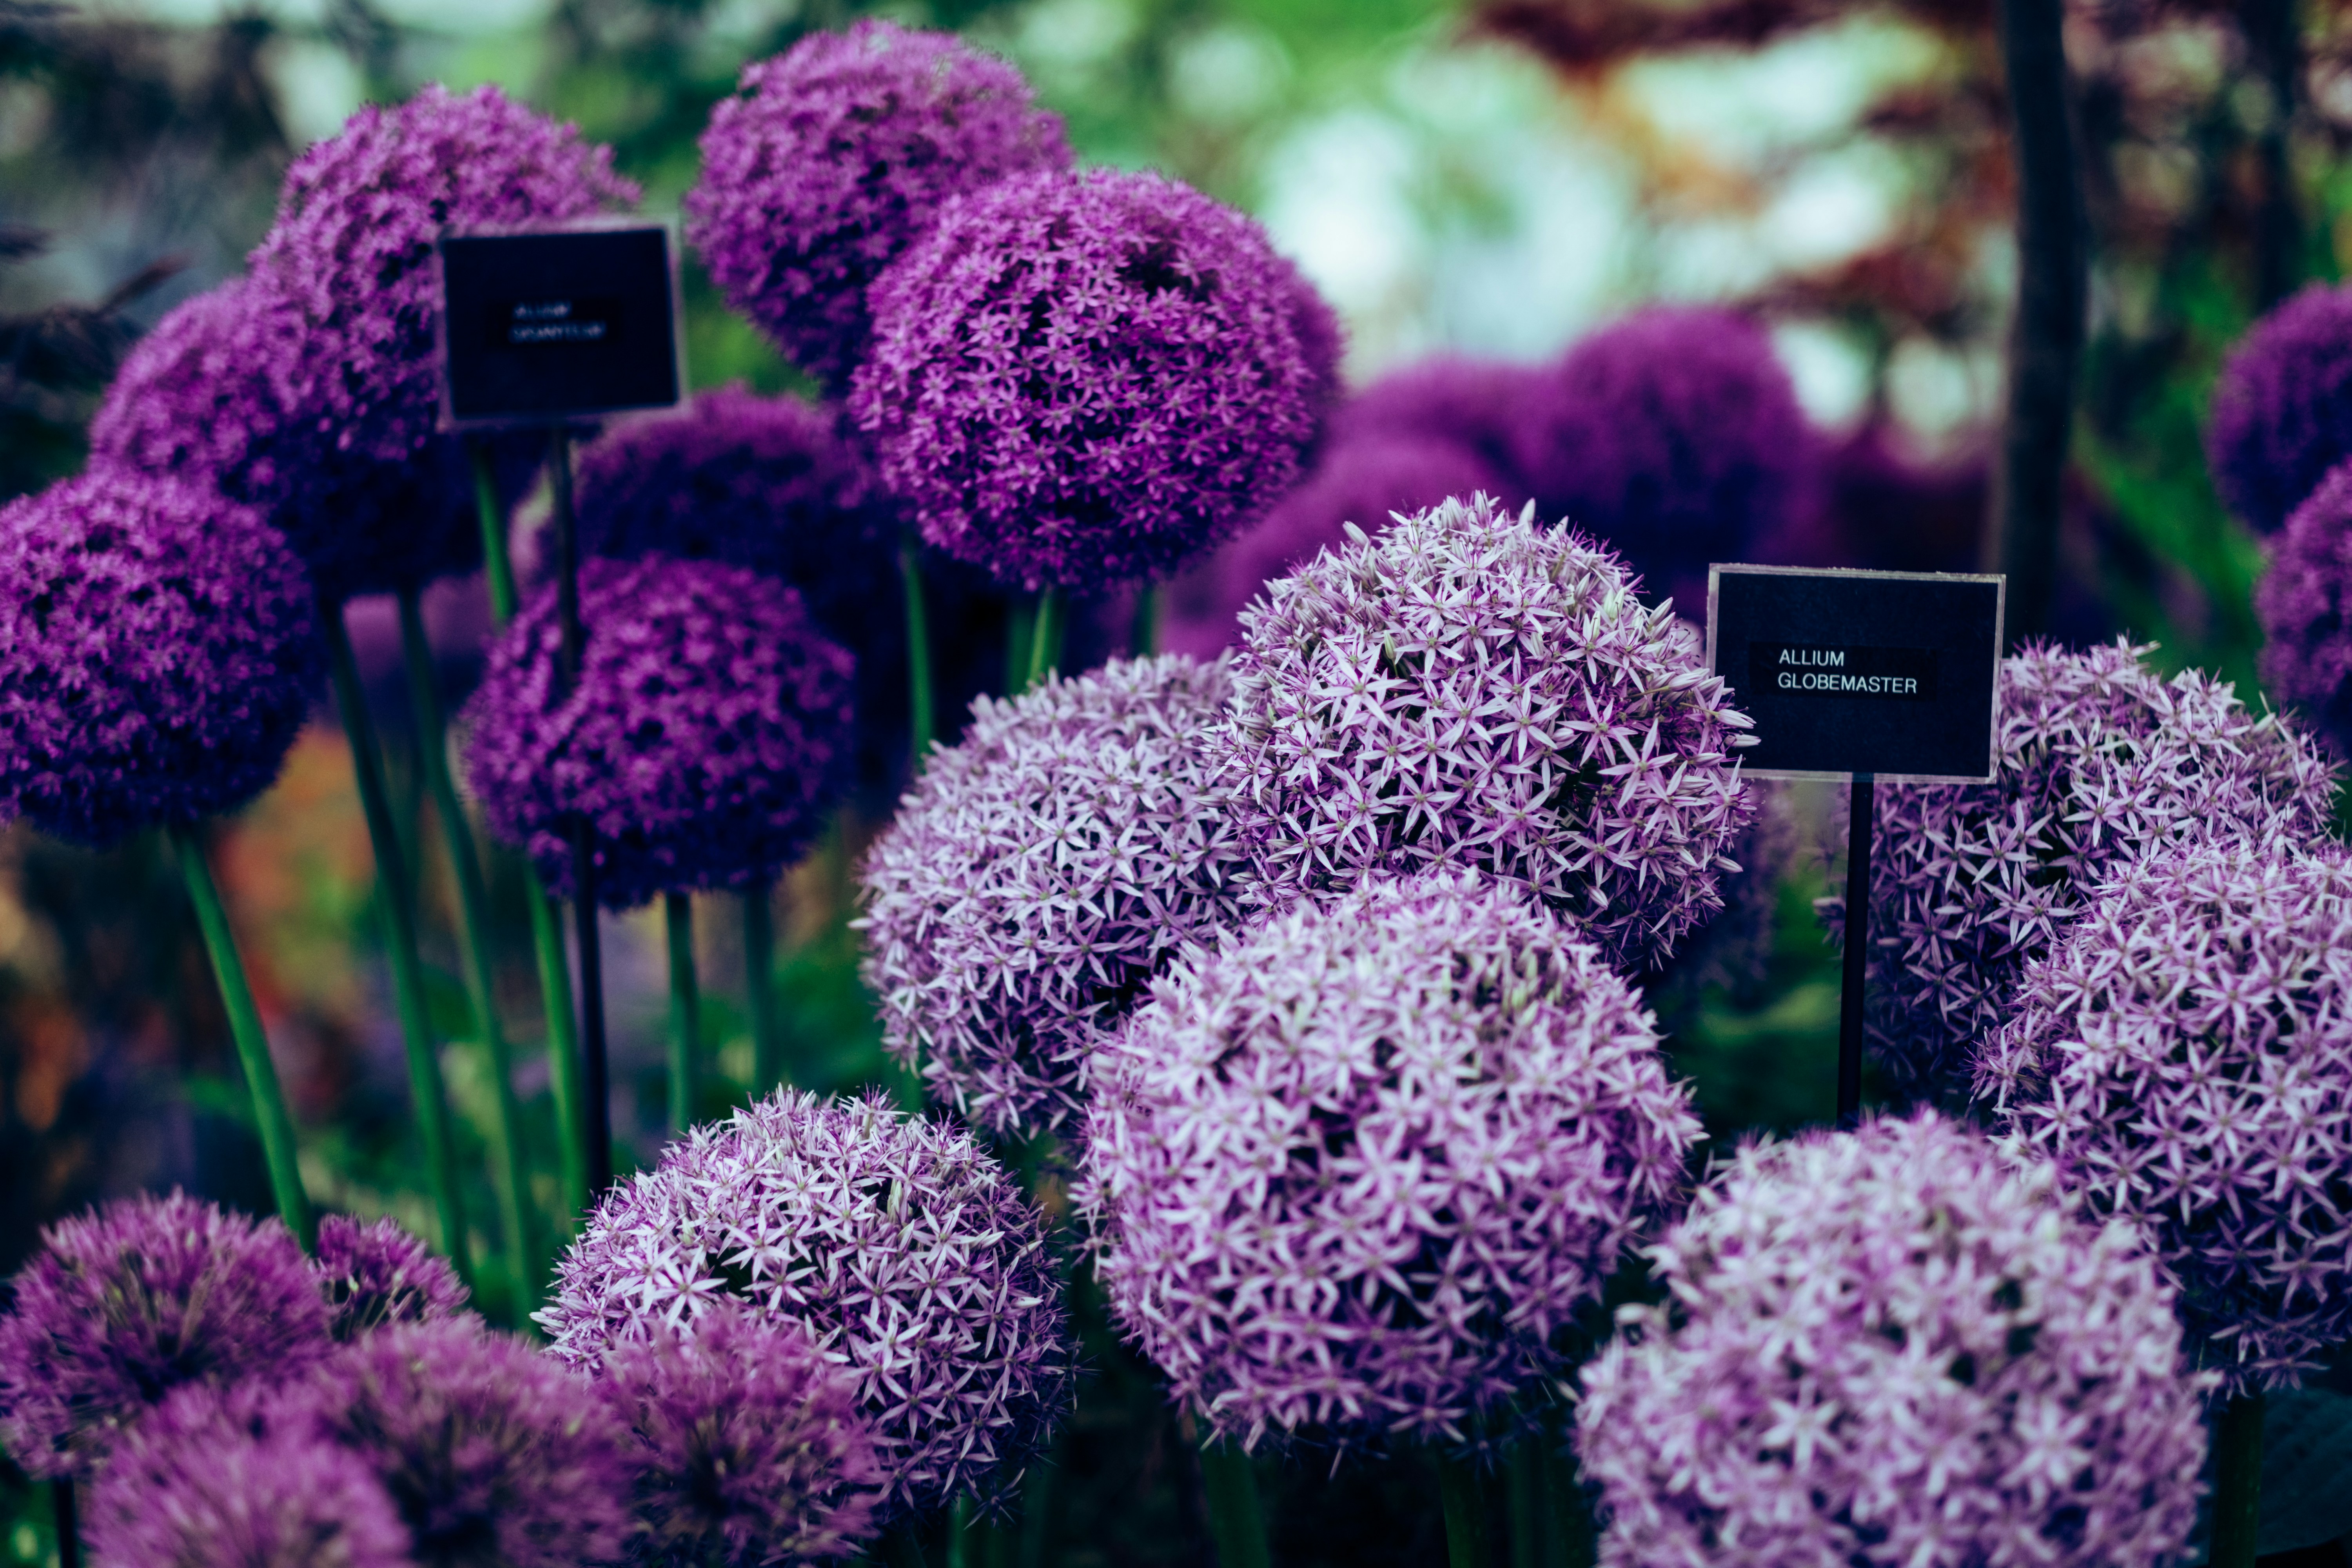 My wife absolutely loves Alliums. This photo is for her.